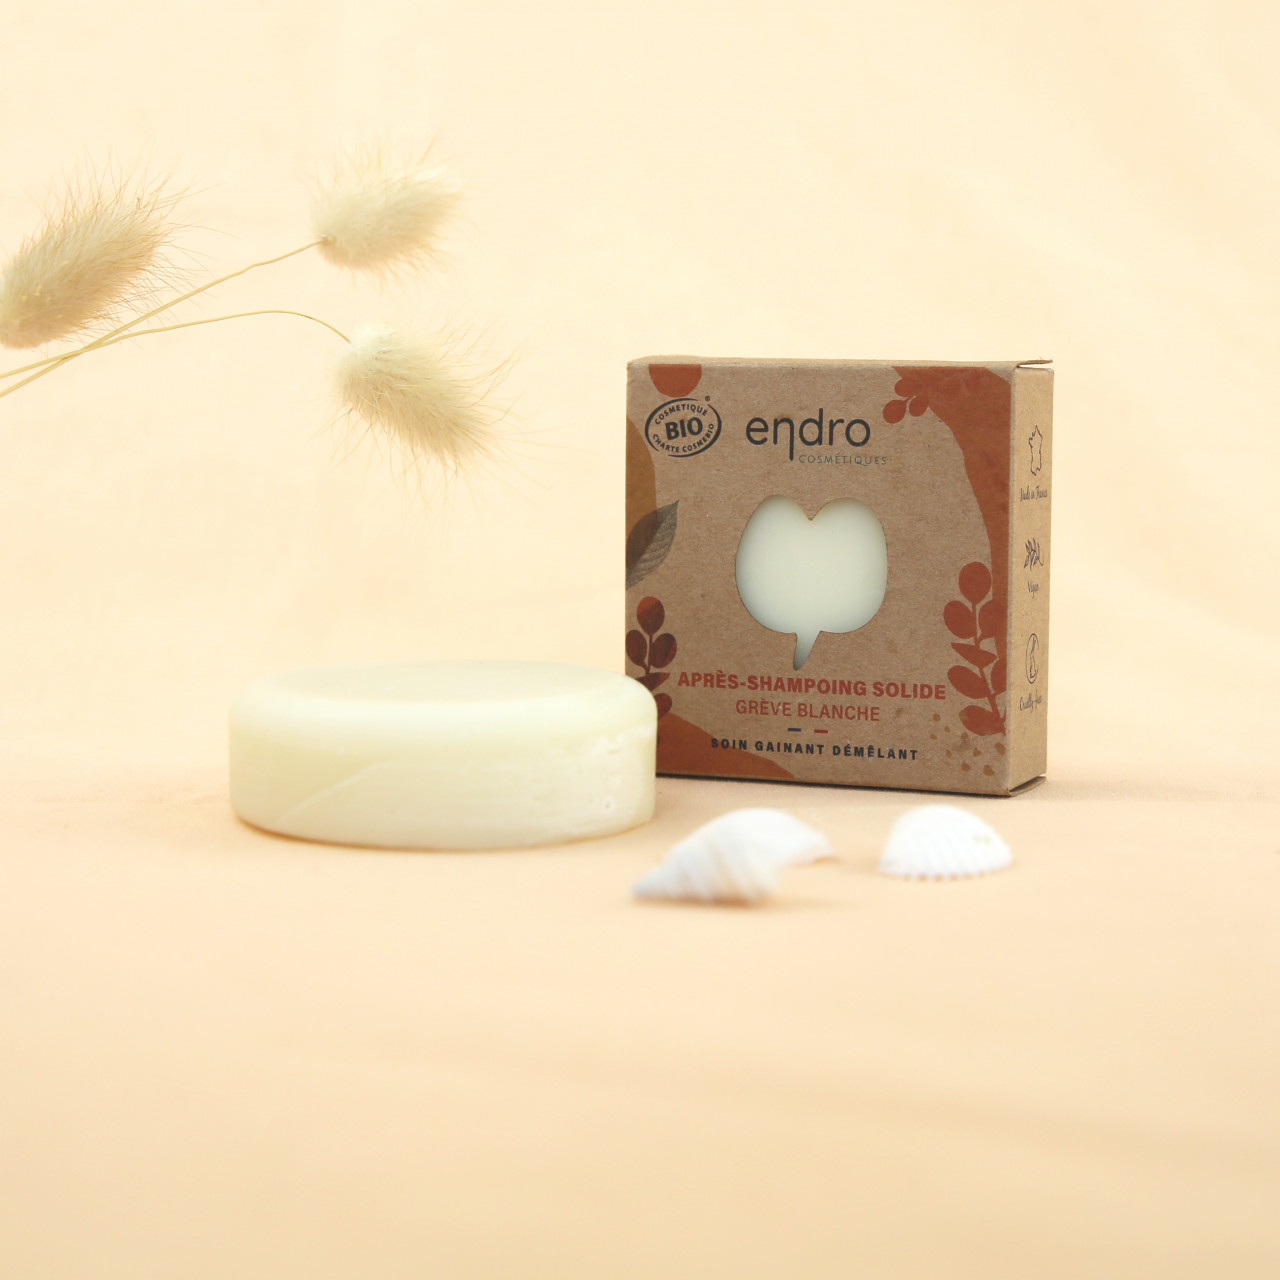 Après Shampoing Solide Endro 65g